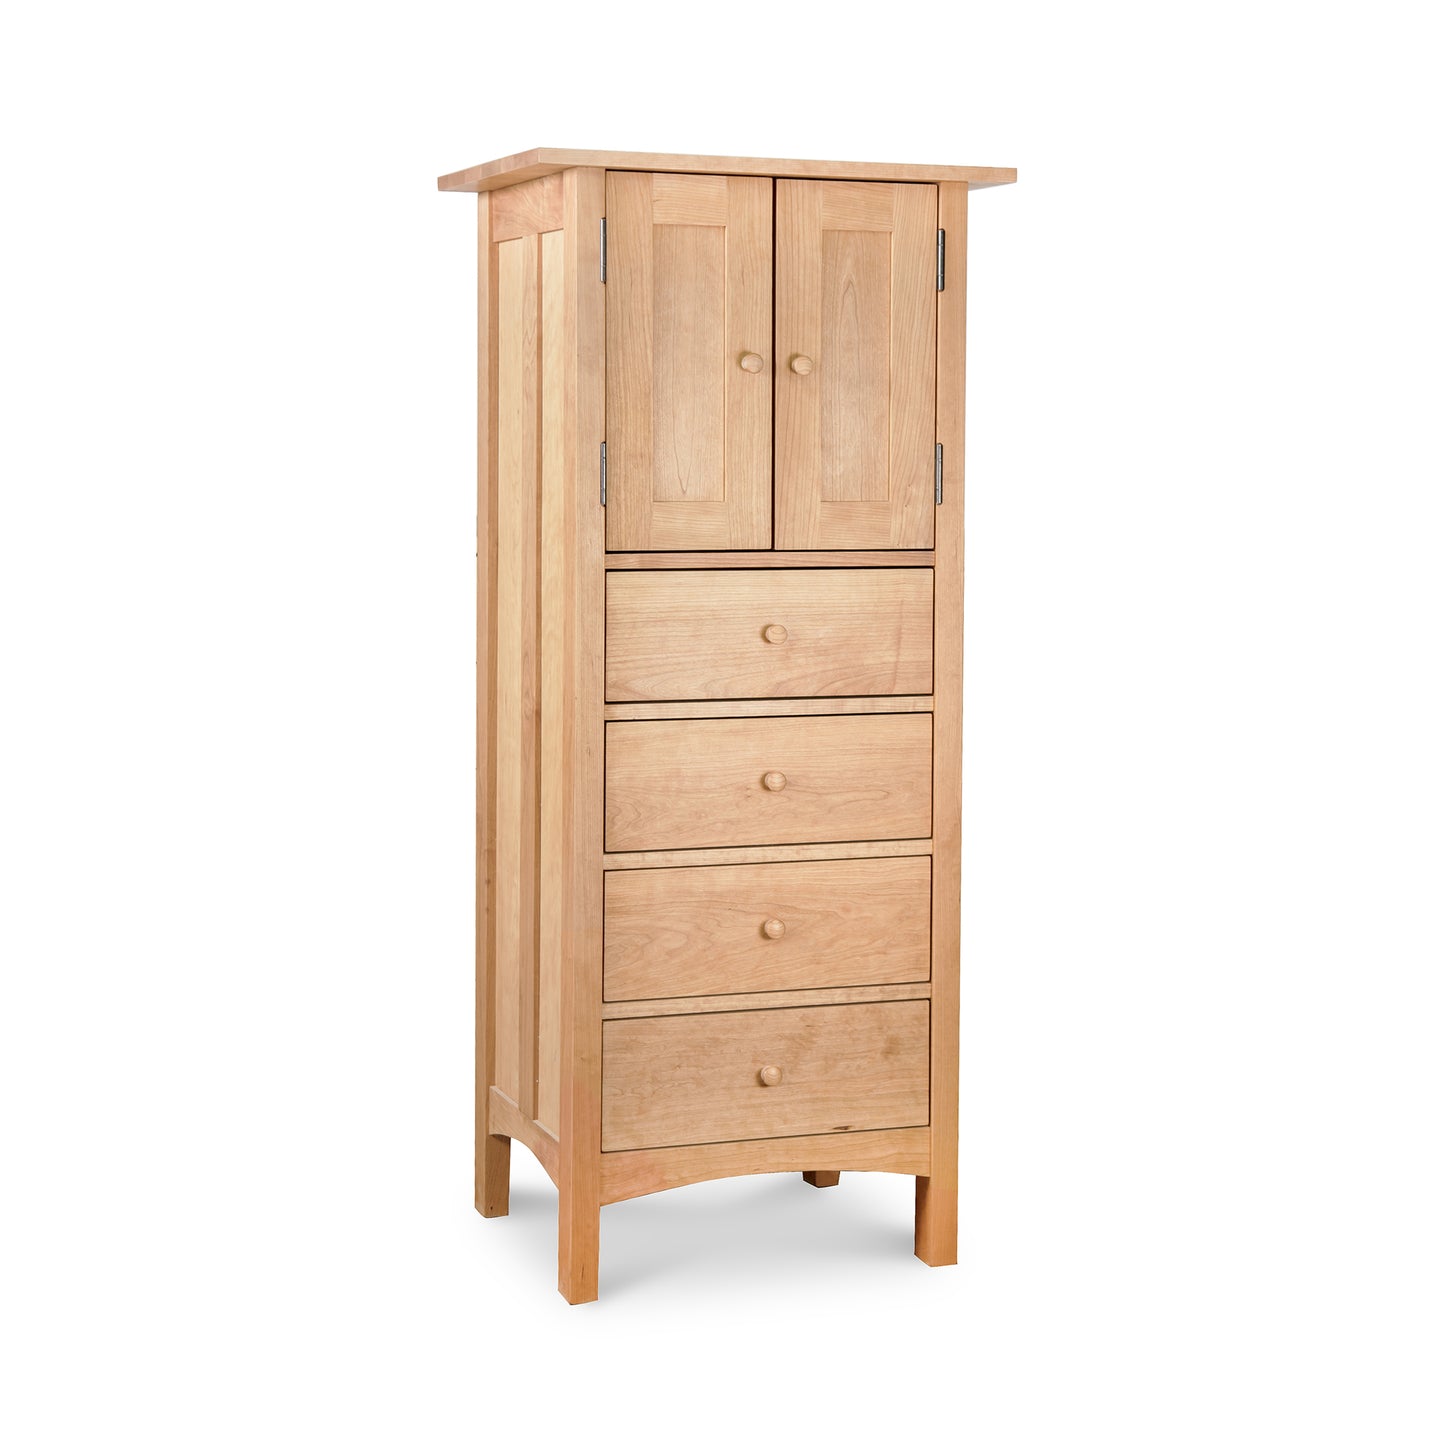 A Vermont Furniture Designs Burlington Shaker Tall Storage Chest with drawers and a cabinet door, isolated on a white background.